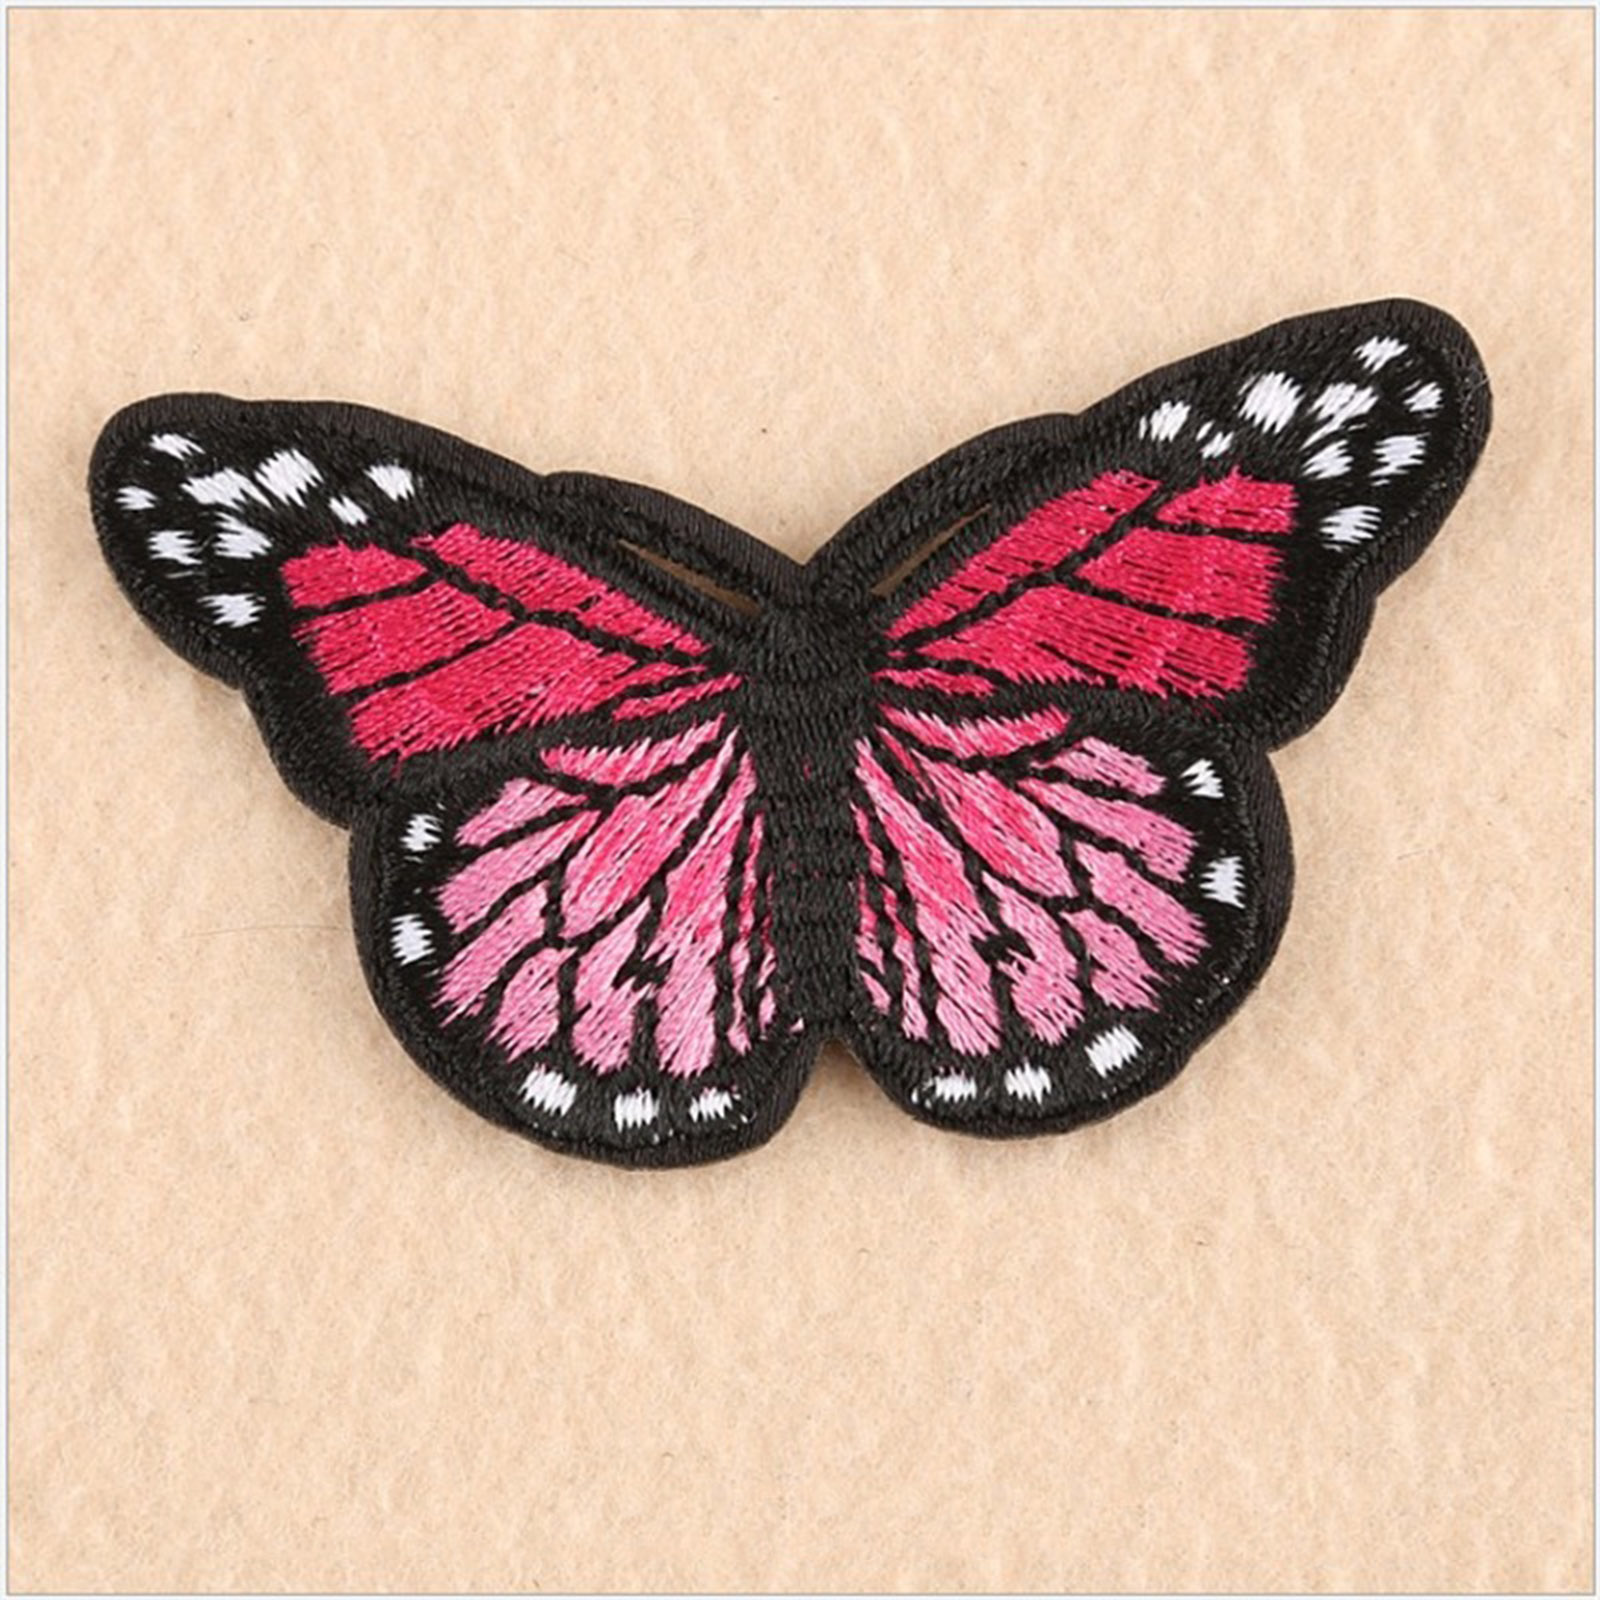 Picture of Fabric Embroidery Iron On Patches Appliques (With Glue Back) DIY Sewing Craft Clothing Decoration Fuchsia Butterfly Animal 78mm x 48mm, 1 Piece